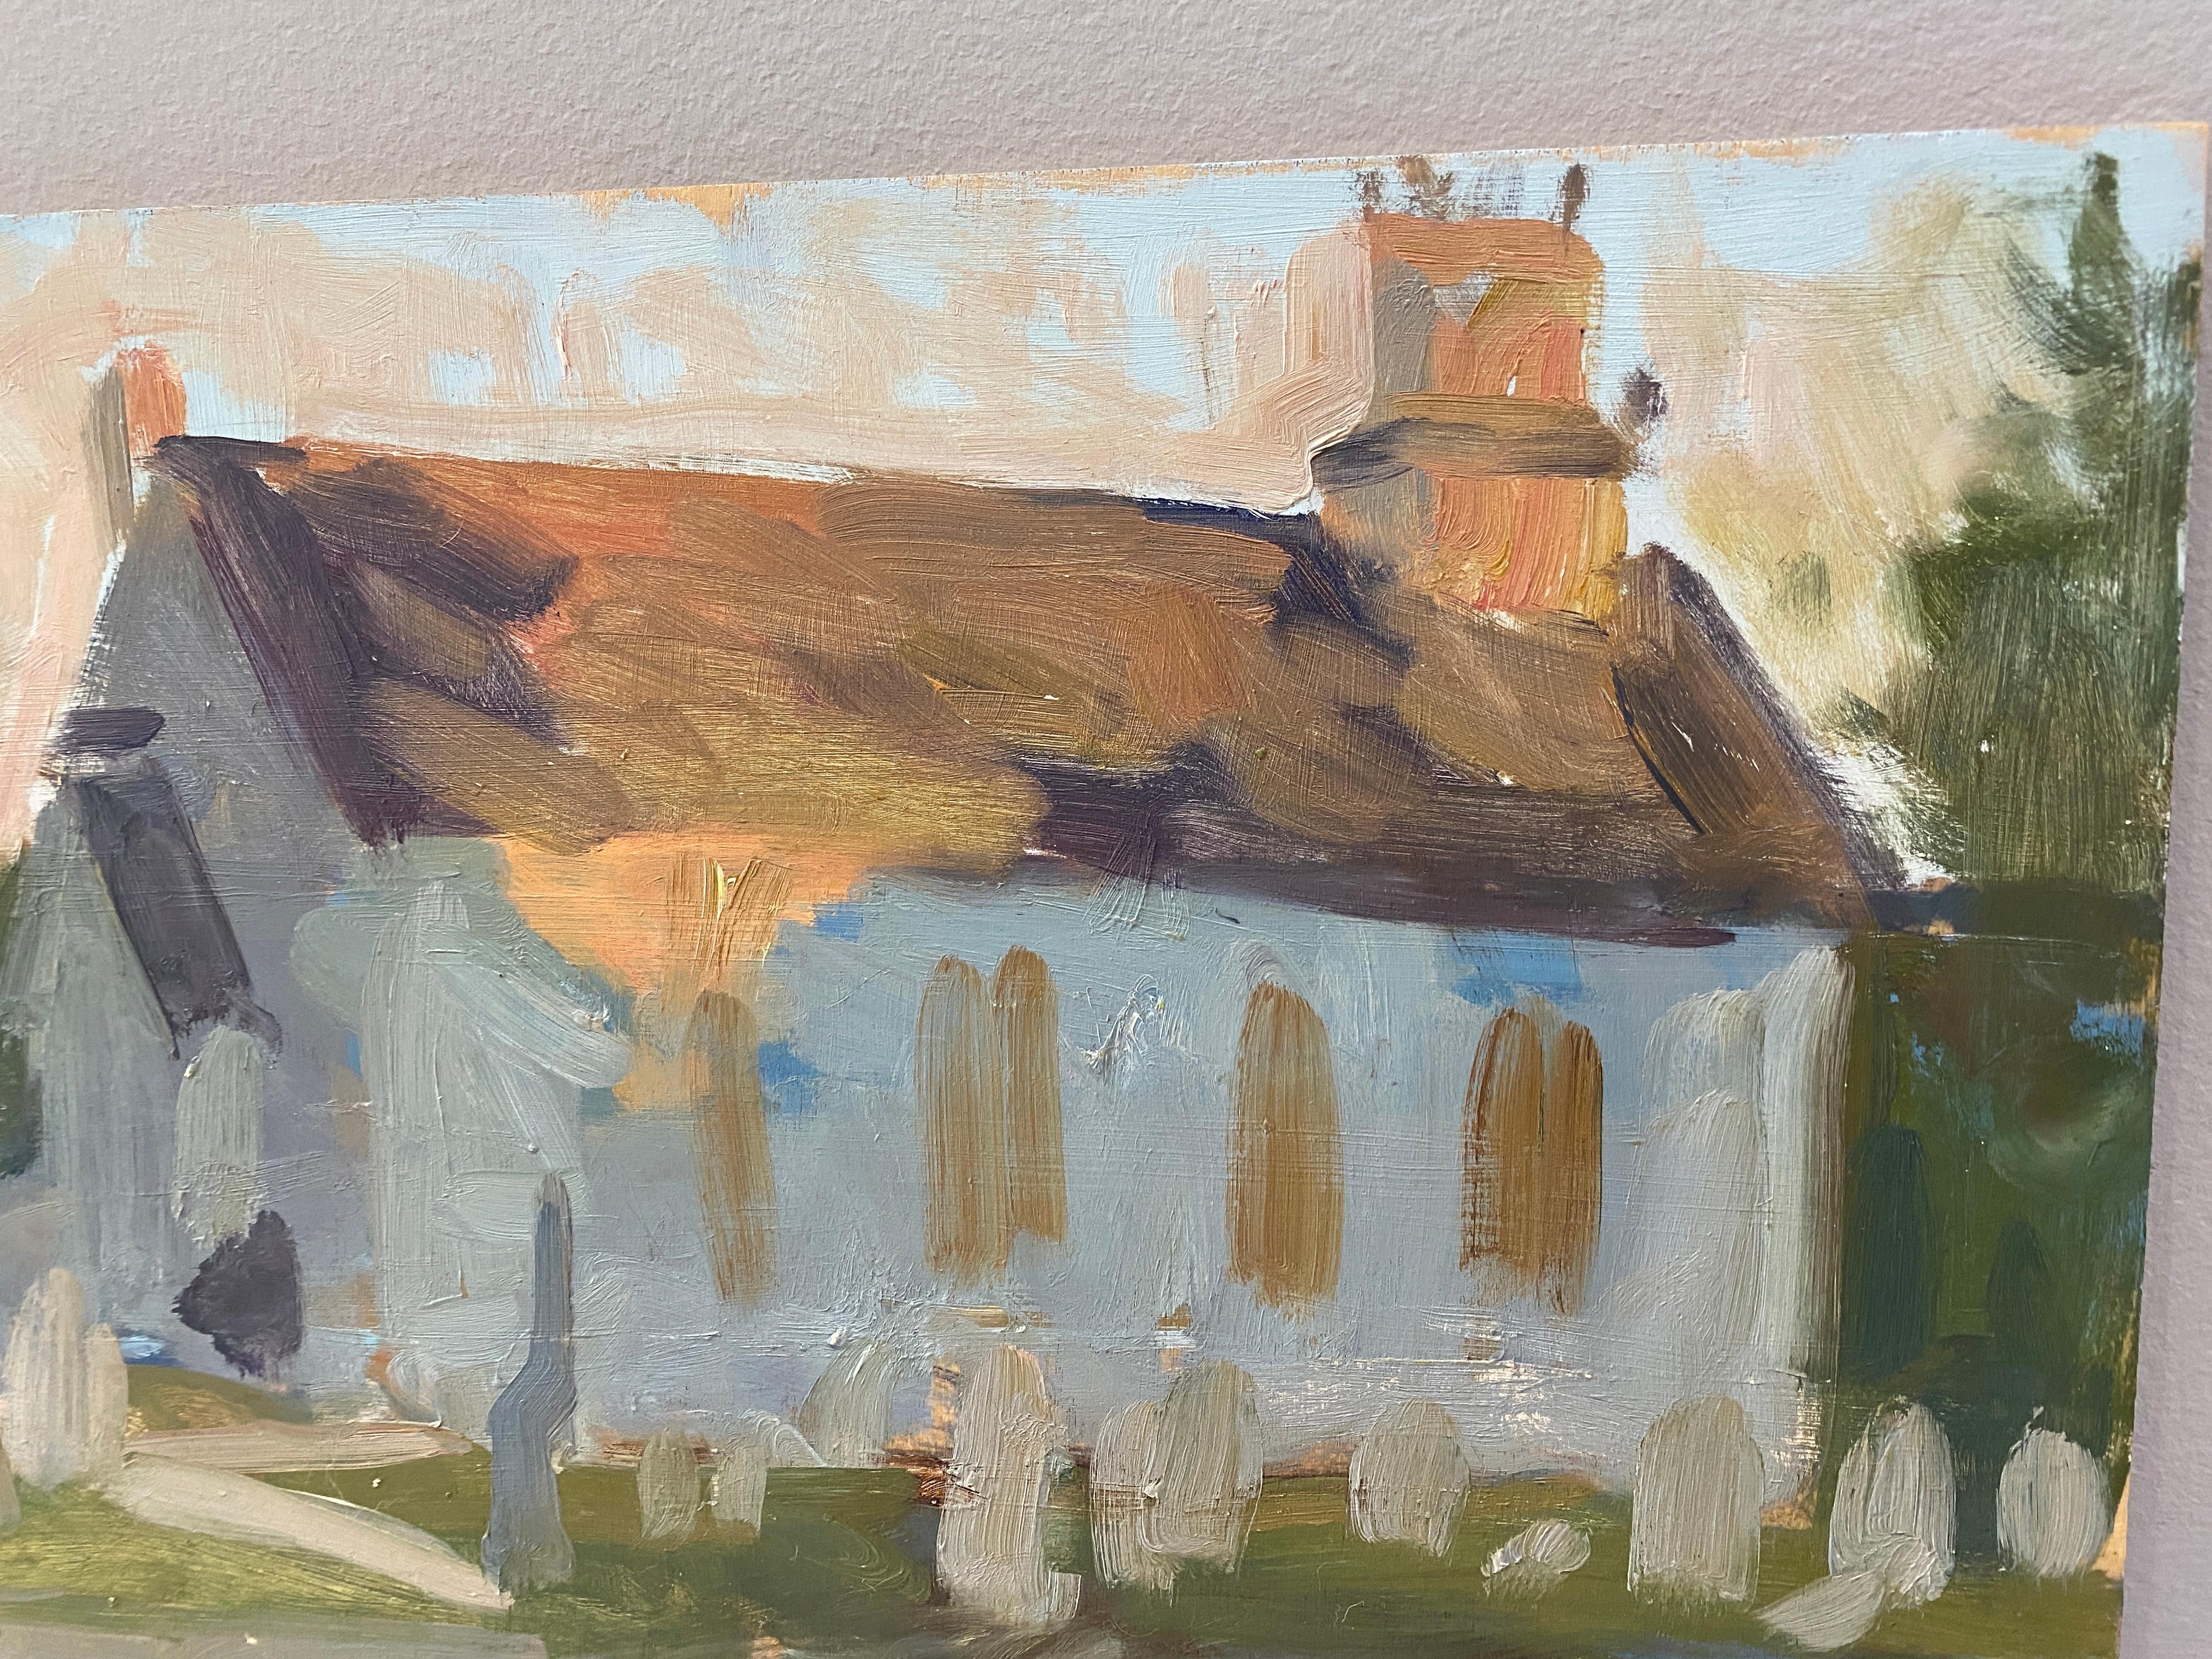 A small scale oil on wood panel sketch of a white church, painted from life. A blue sky is dusted with an orange hue, signifying the end of the day. Orange light hits the roof of the church, and leaves the rest of the structure in shadow. A cretara